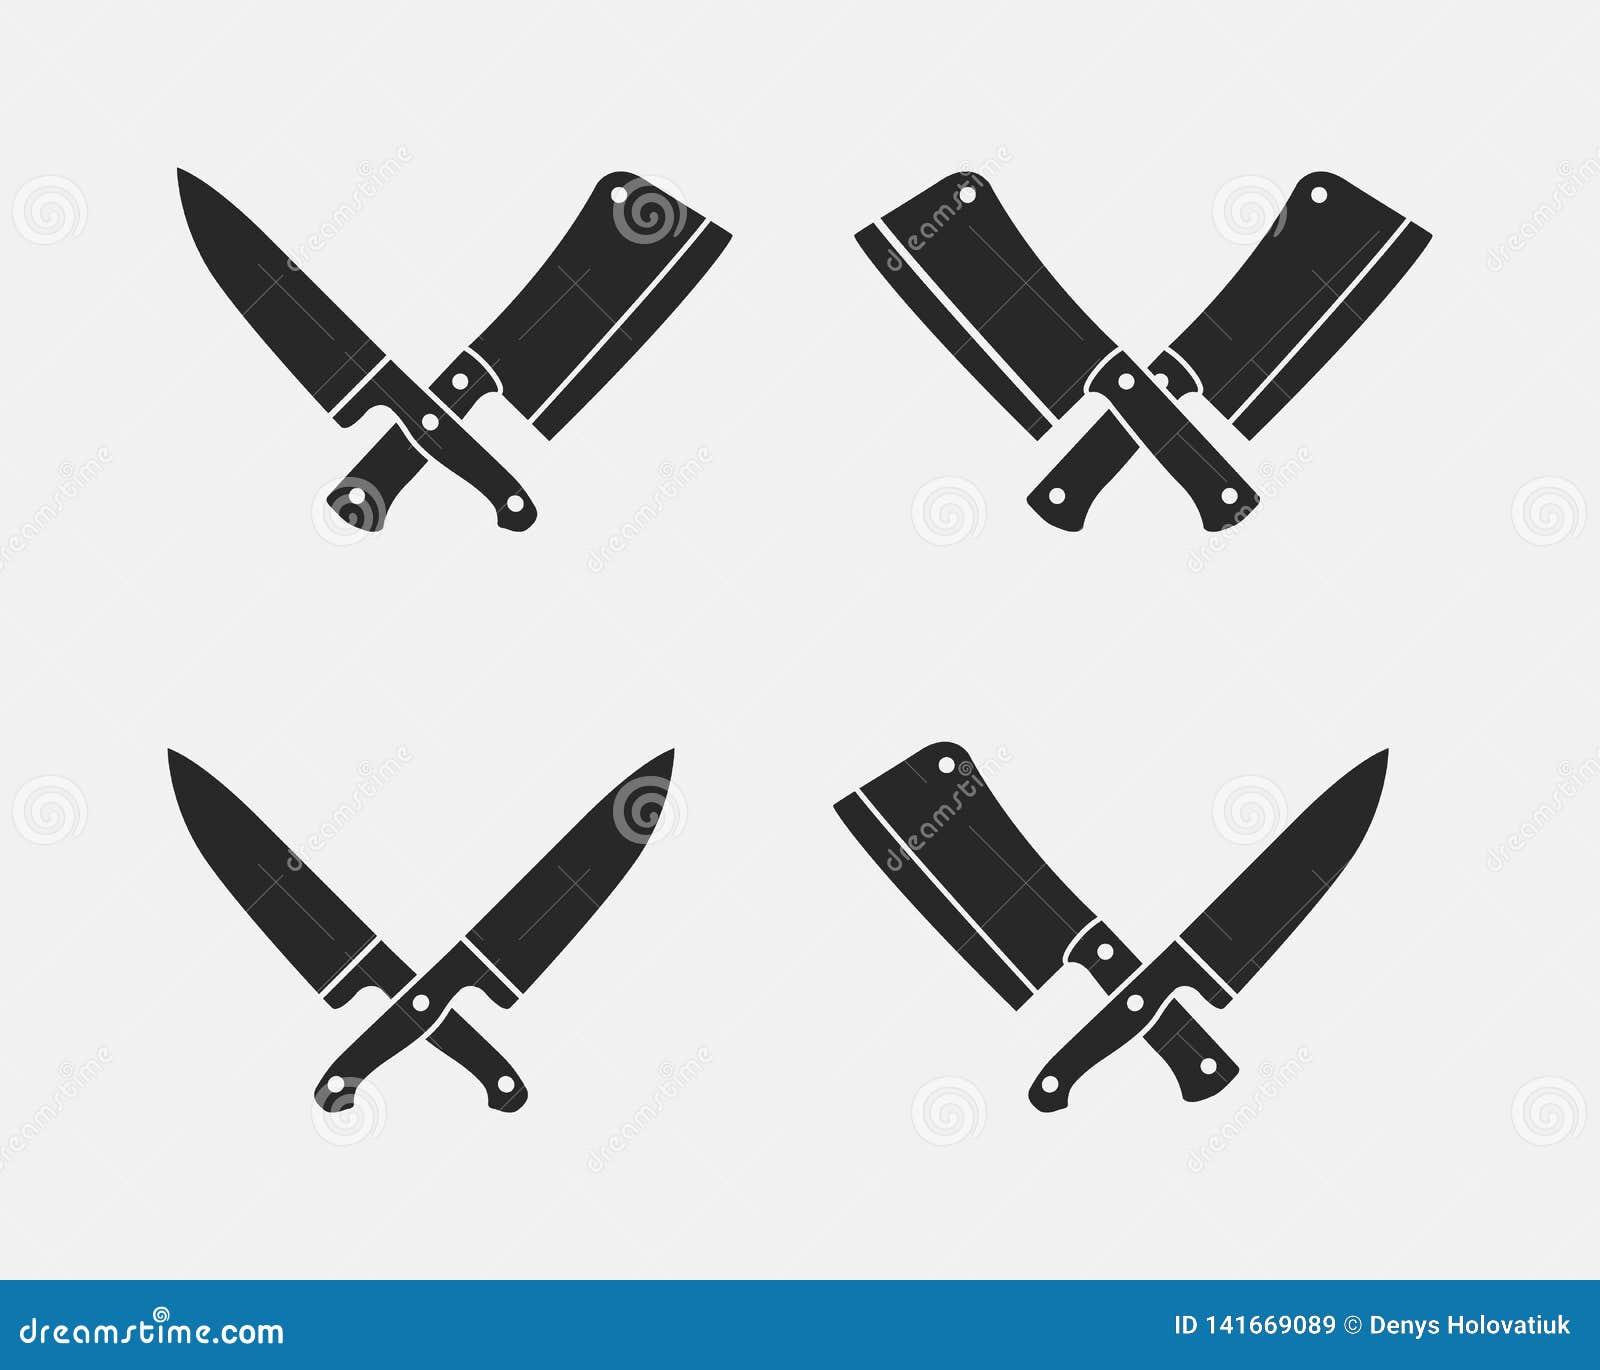 set of meat cutting knives icons. butcher knives  on a white background.  